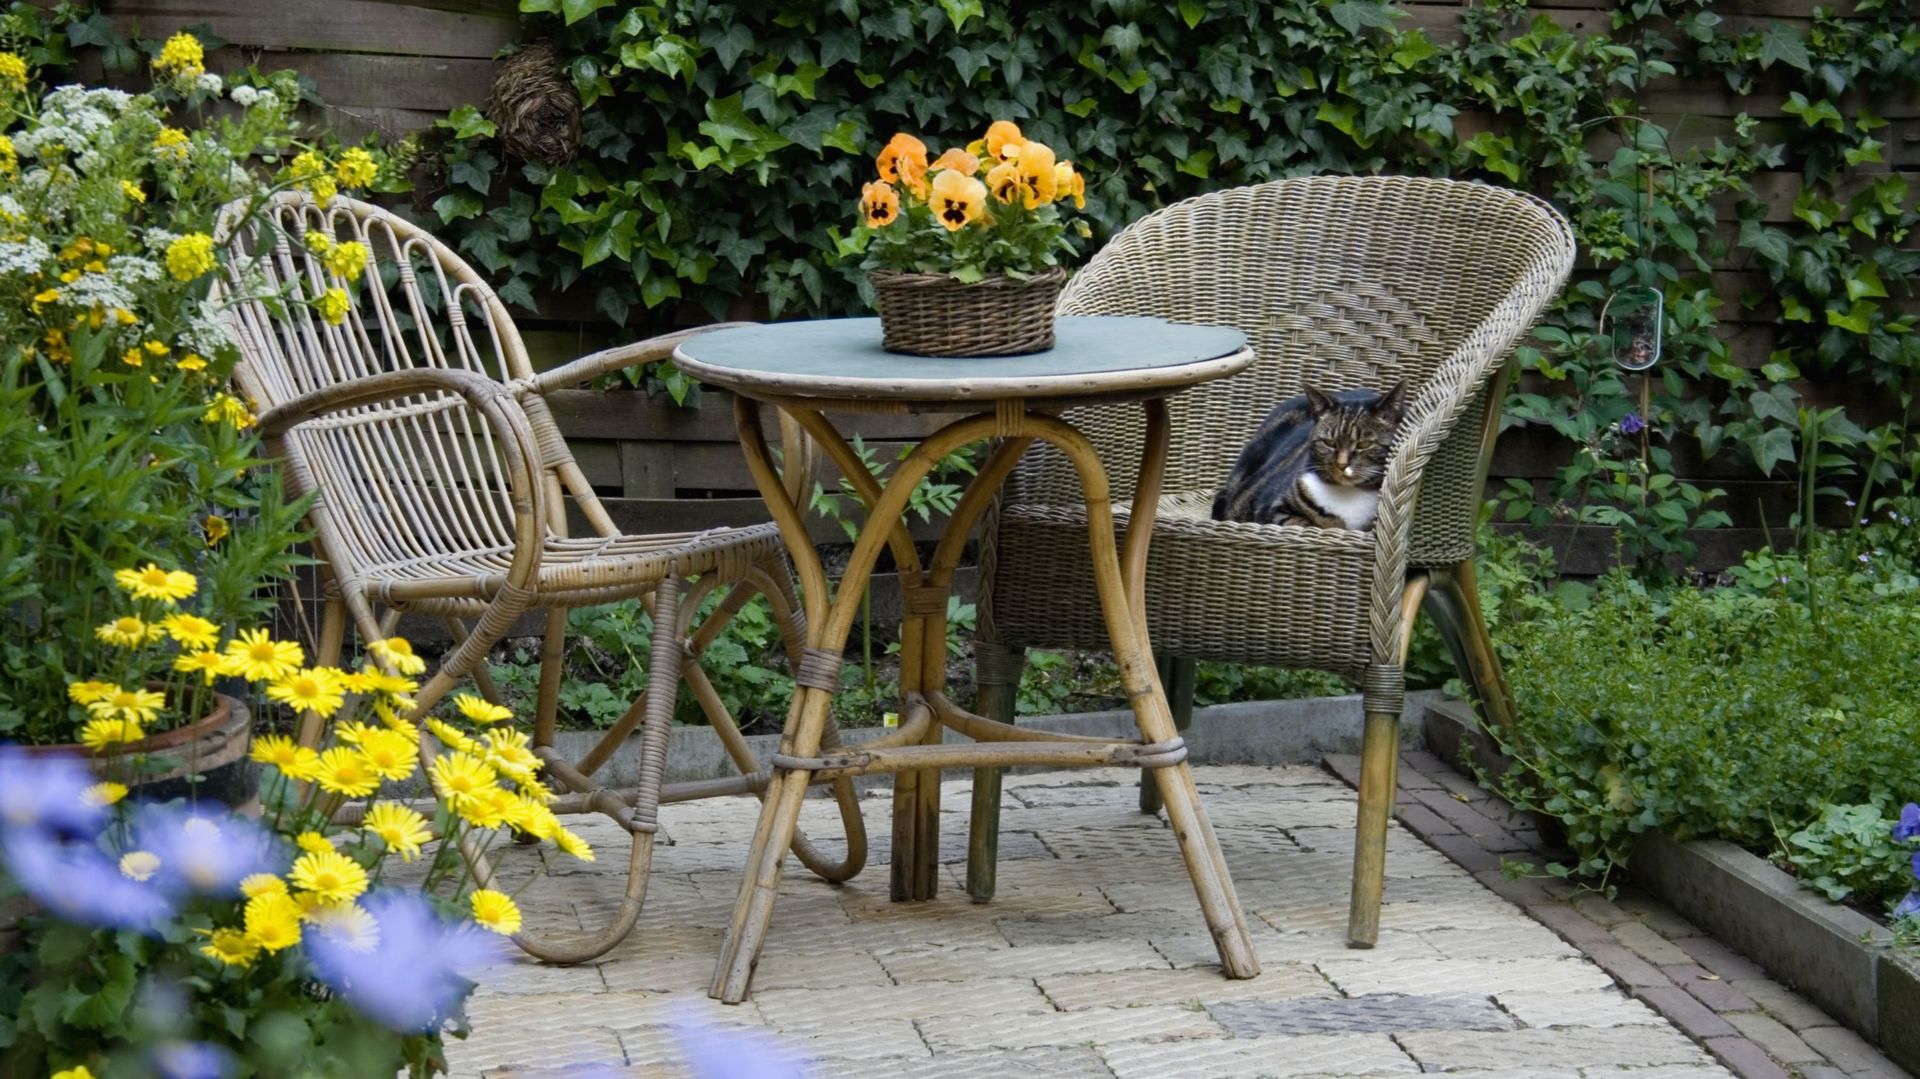 Garden Patio with Wicker Furniture and Housecat